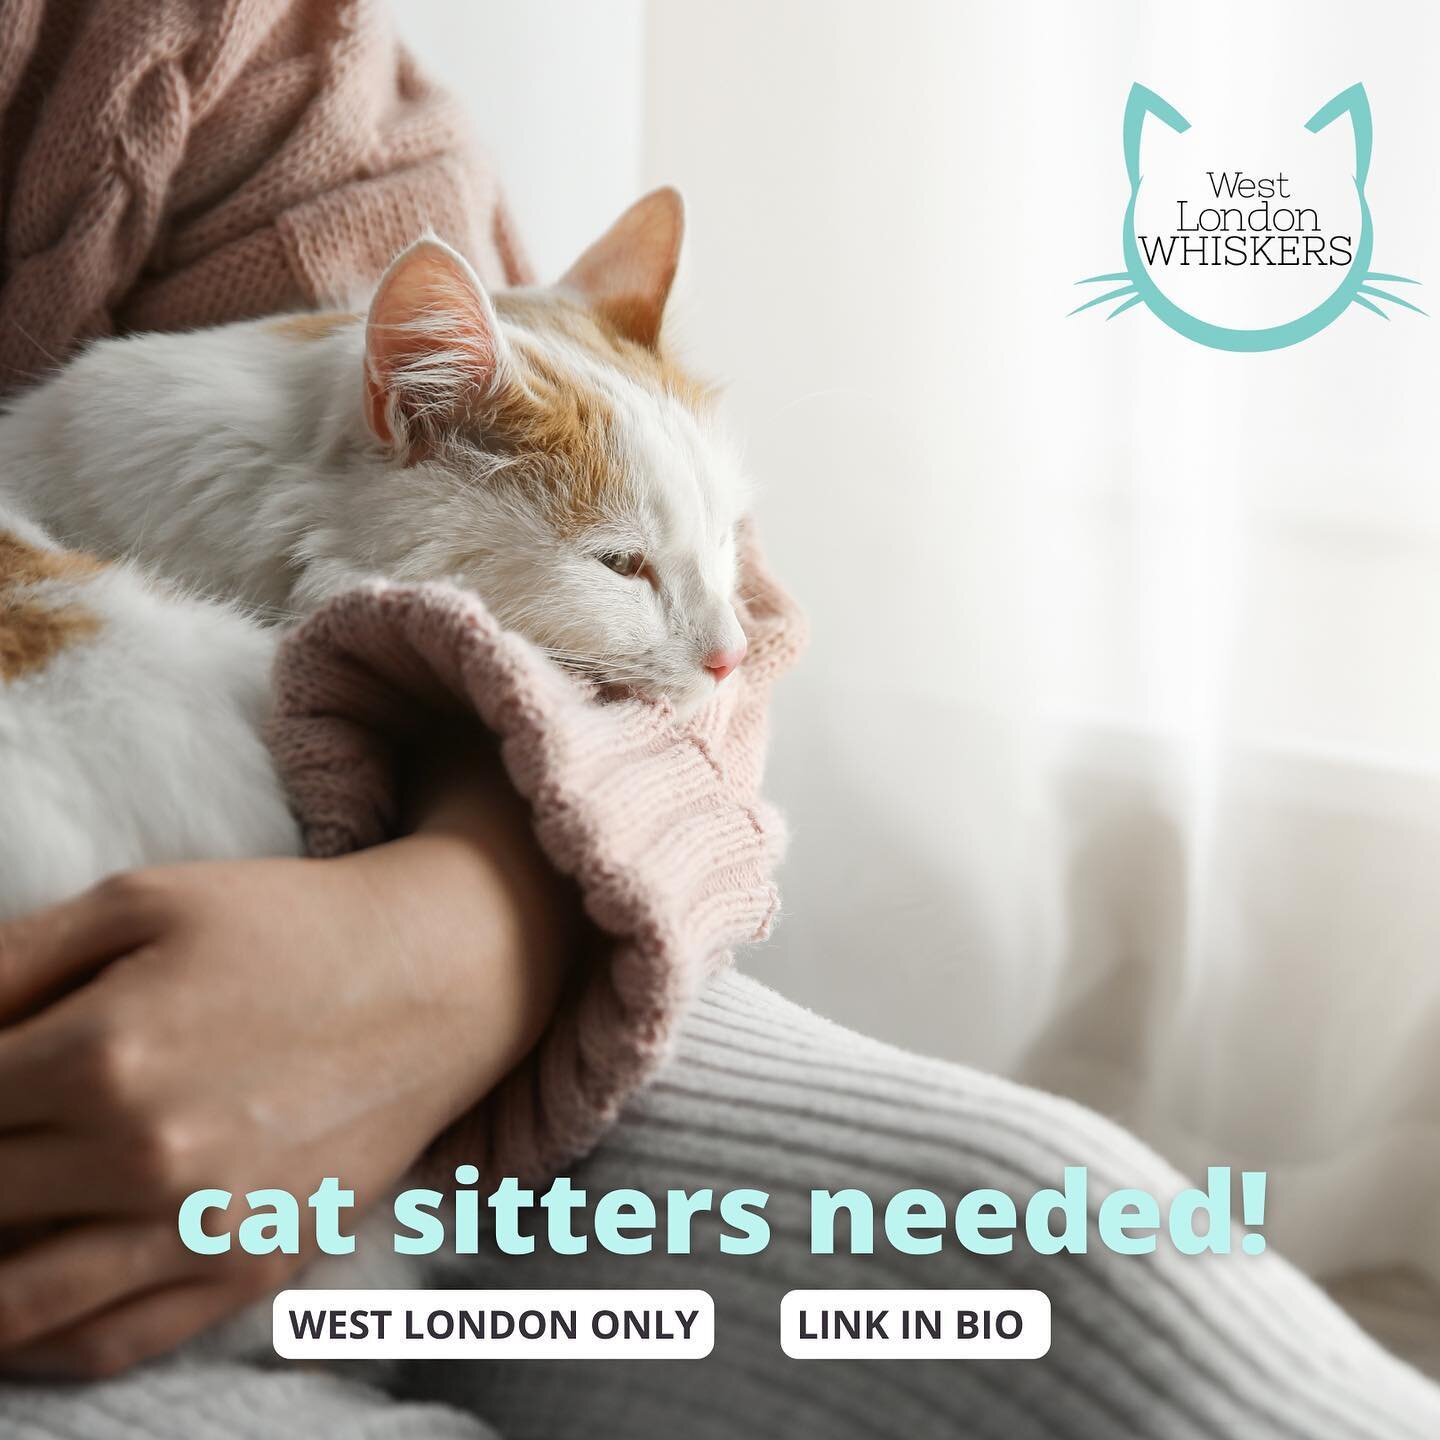 We are looking for sitters to join our small catsitting agency West London Whiskers.  MUST BE EXPERIENCED WITH CATS + MUST BE AVAILABLE OVER FESTIVE SEASON 🎄🎄🎄We are currently ONLY looking for sitters in West London and in the areas specifically m